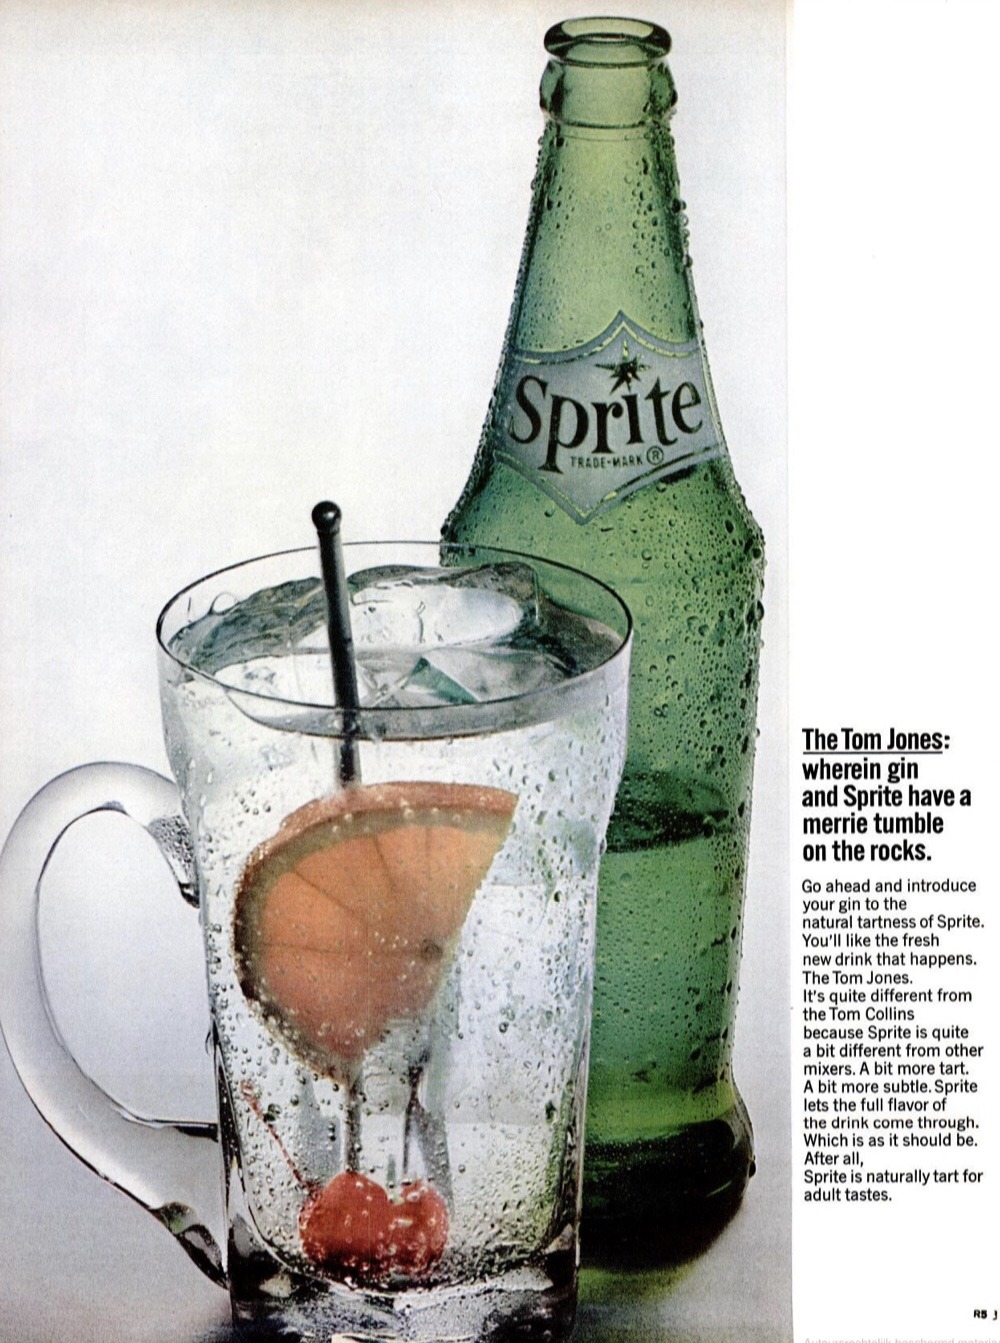 Vintage Love Of Food And So Much More😁 — 1964 Sprite Soda advertisement 1960s Soda Advertising